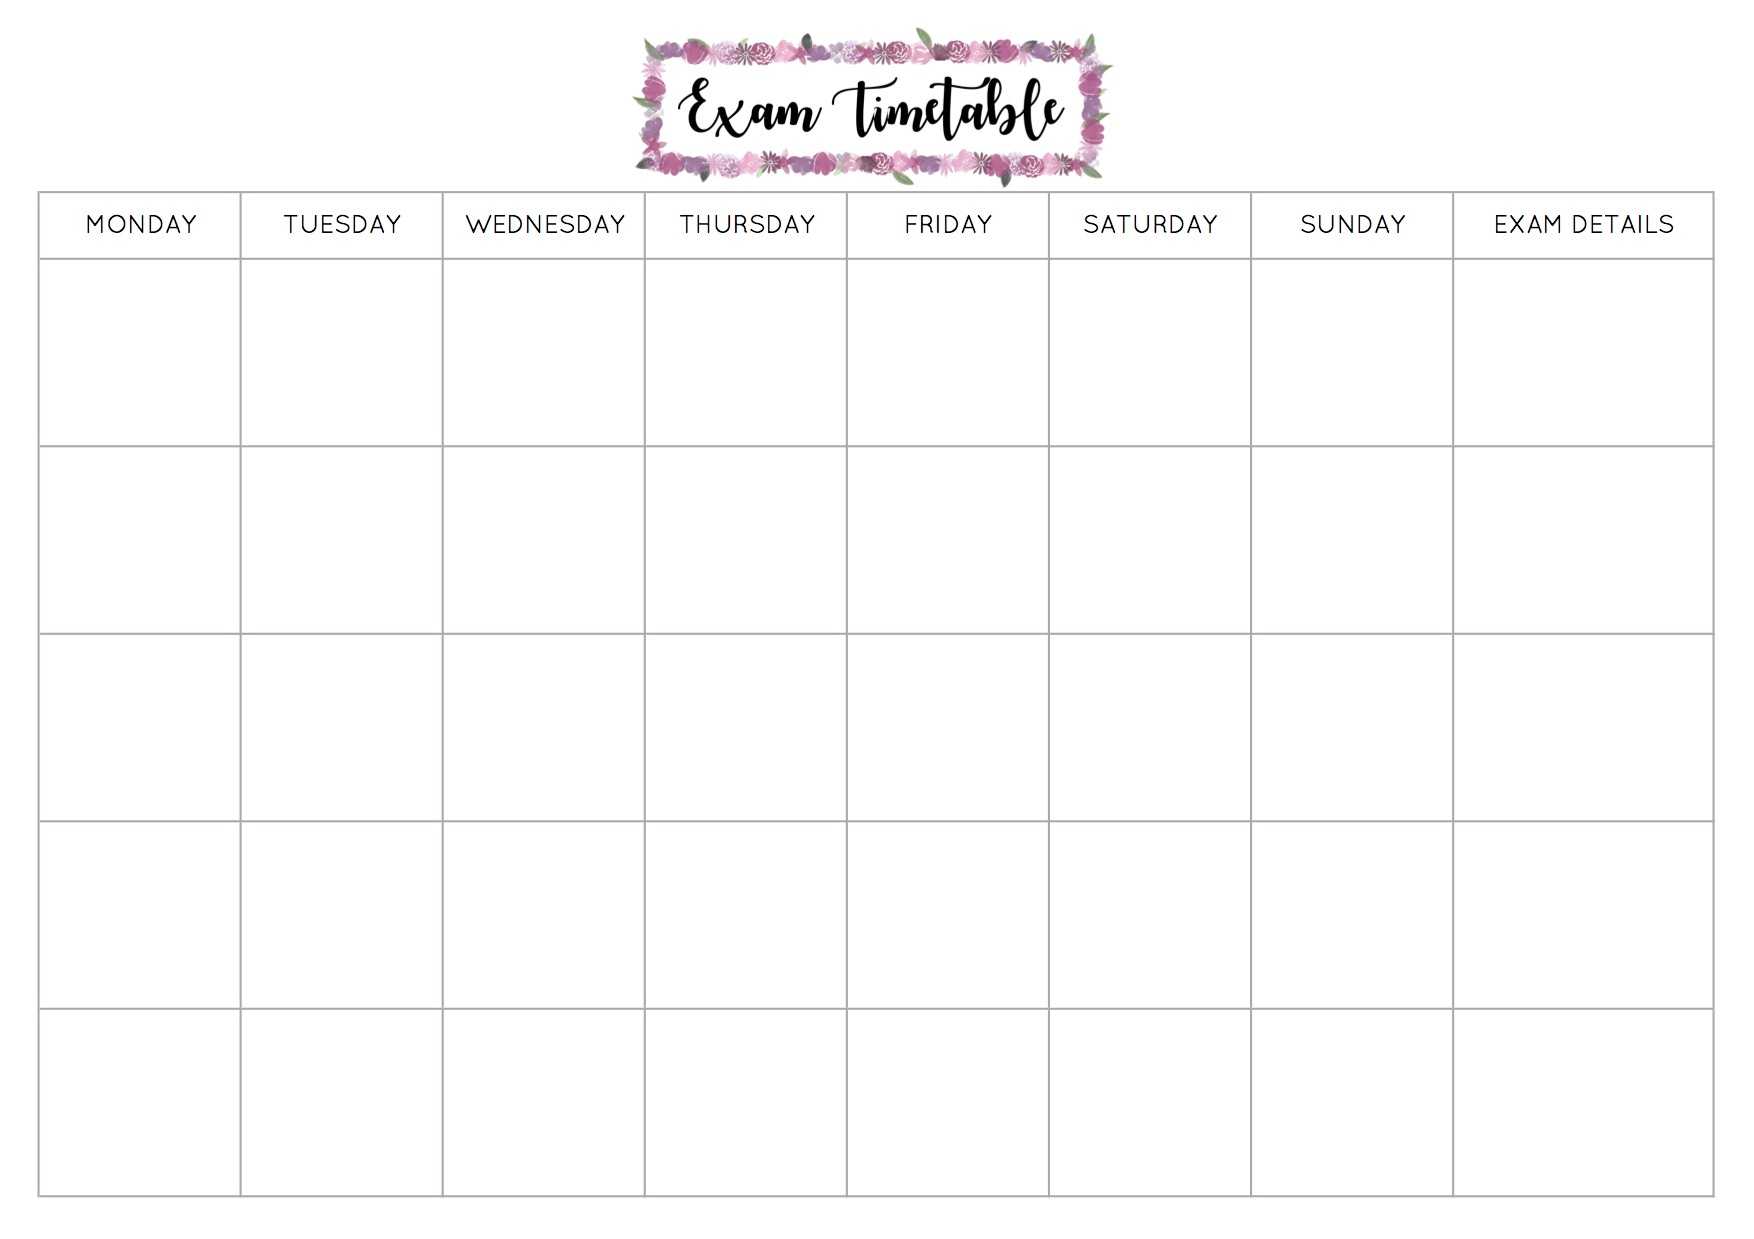 Revision Timetable Templates – Zohre.horizonconsulting.co In Blank Revision Timetable Template